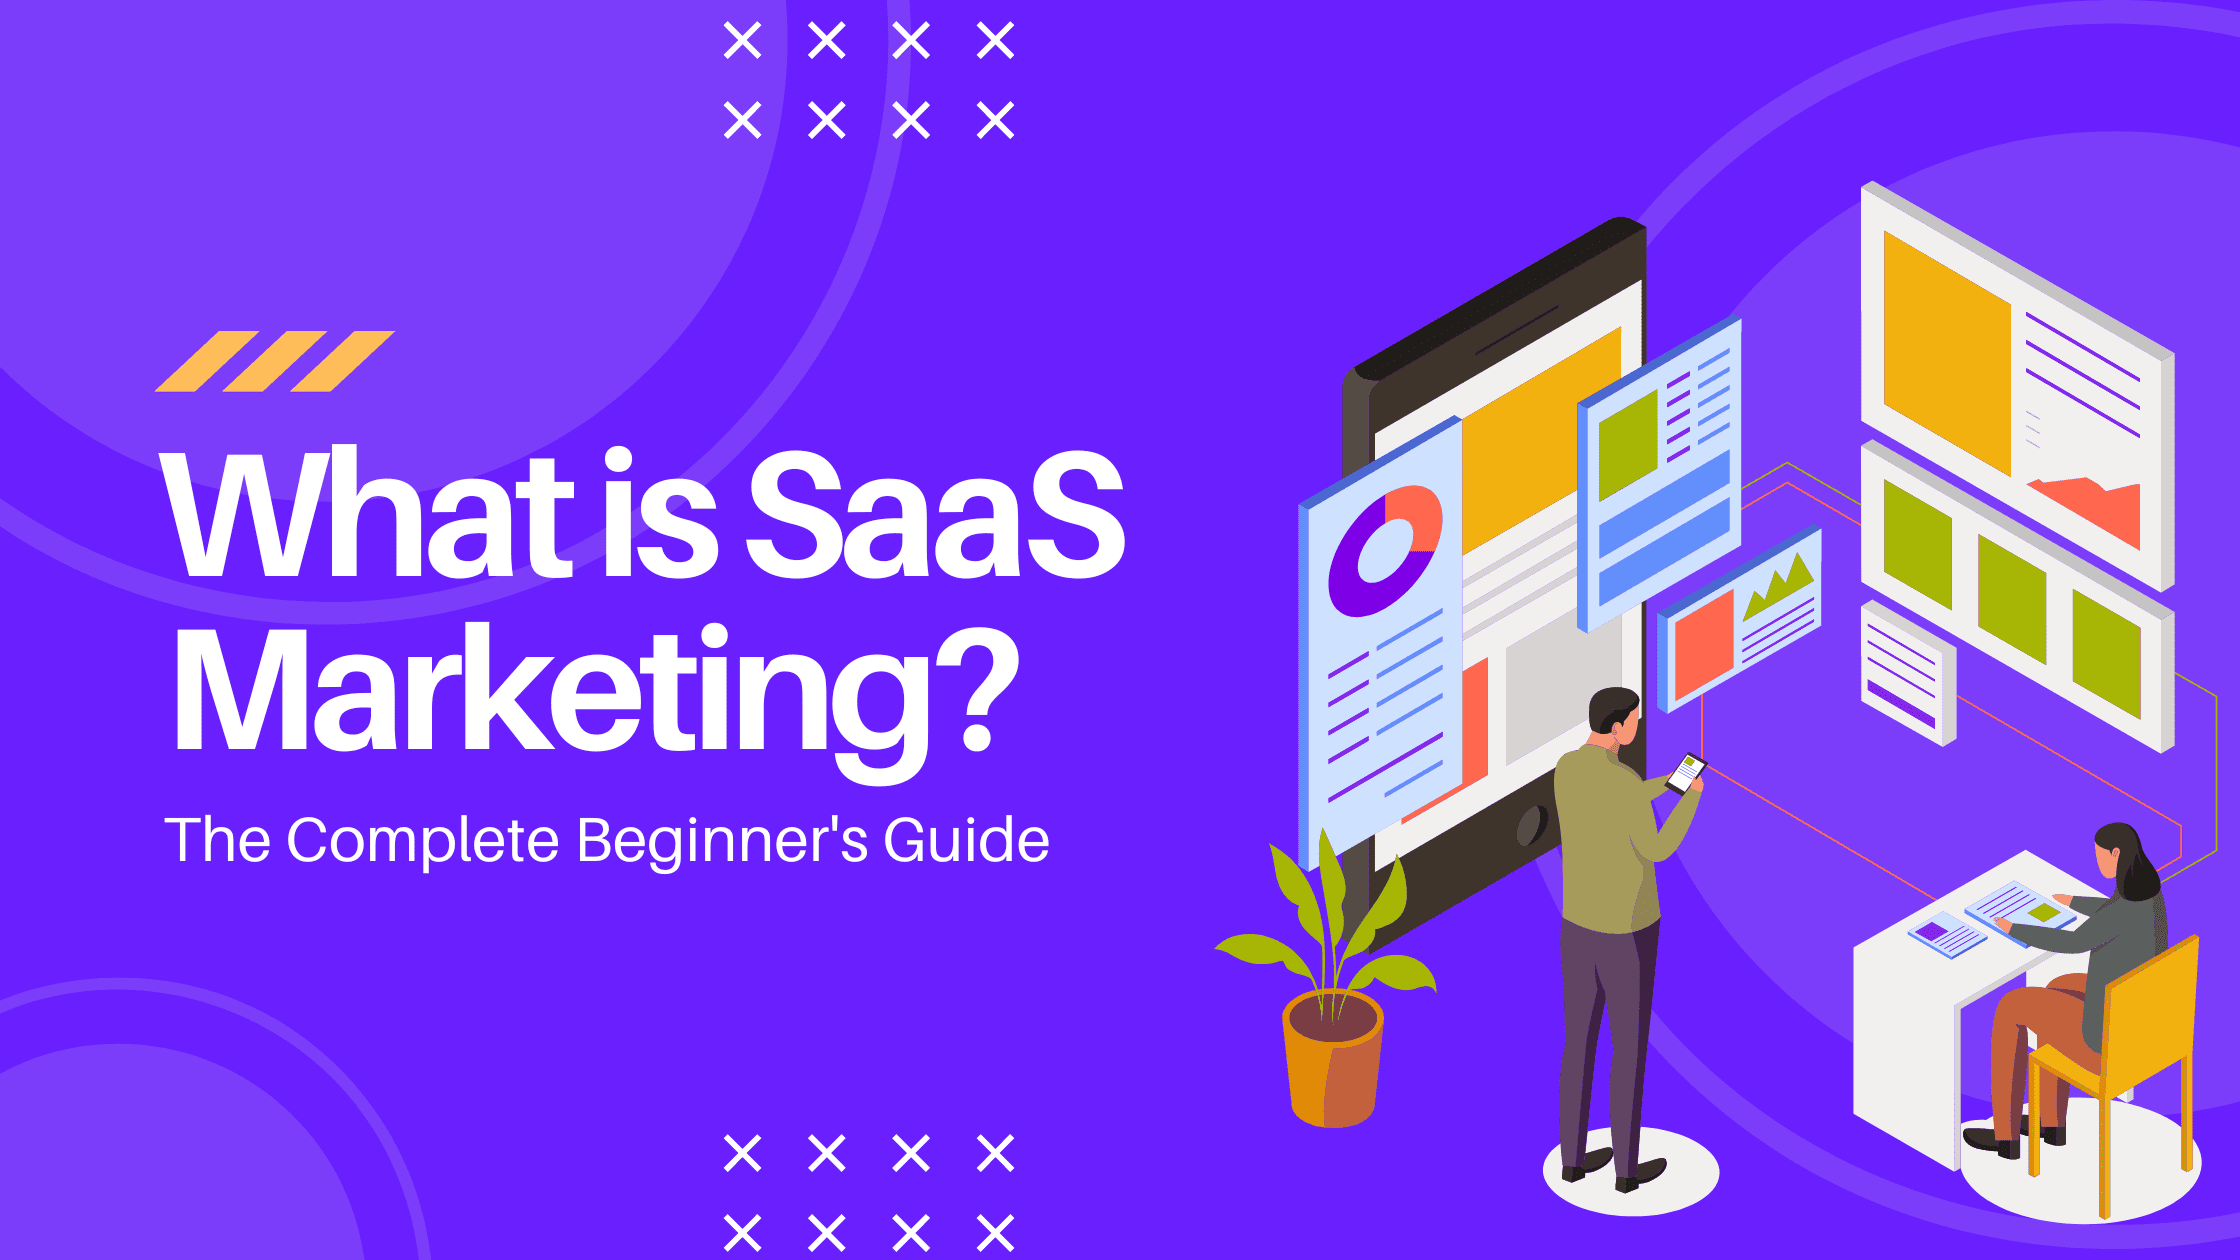 What Is SaaS Marketing? The Complete Beginner's Guide